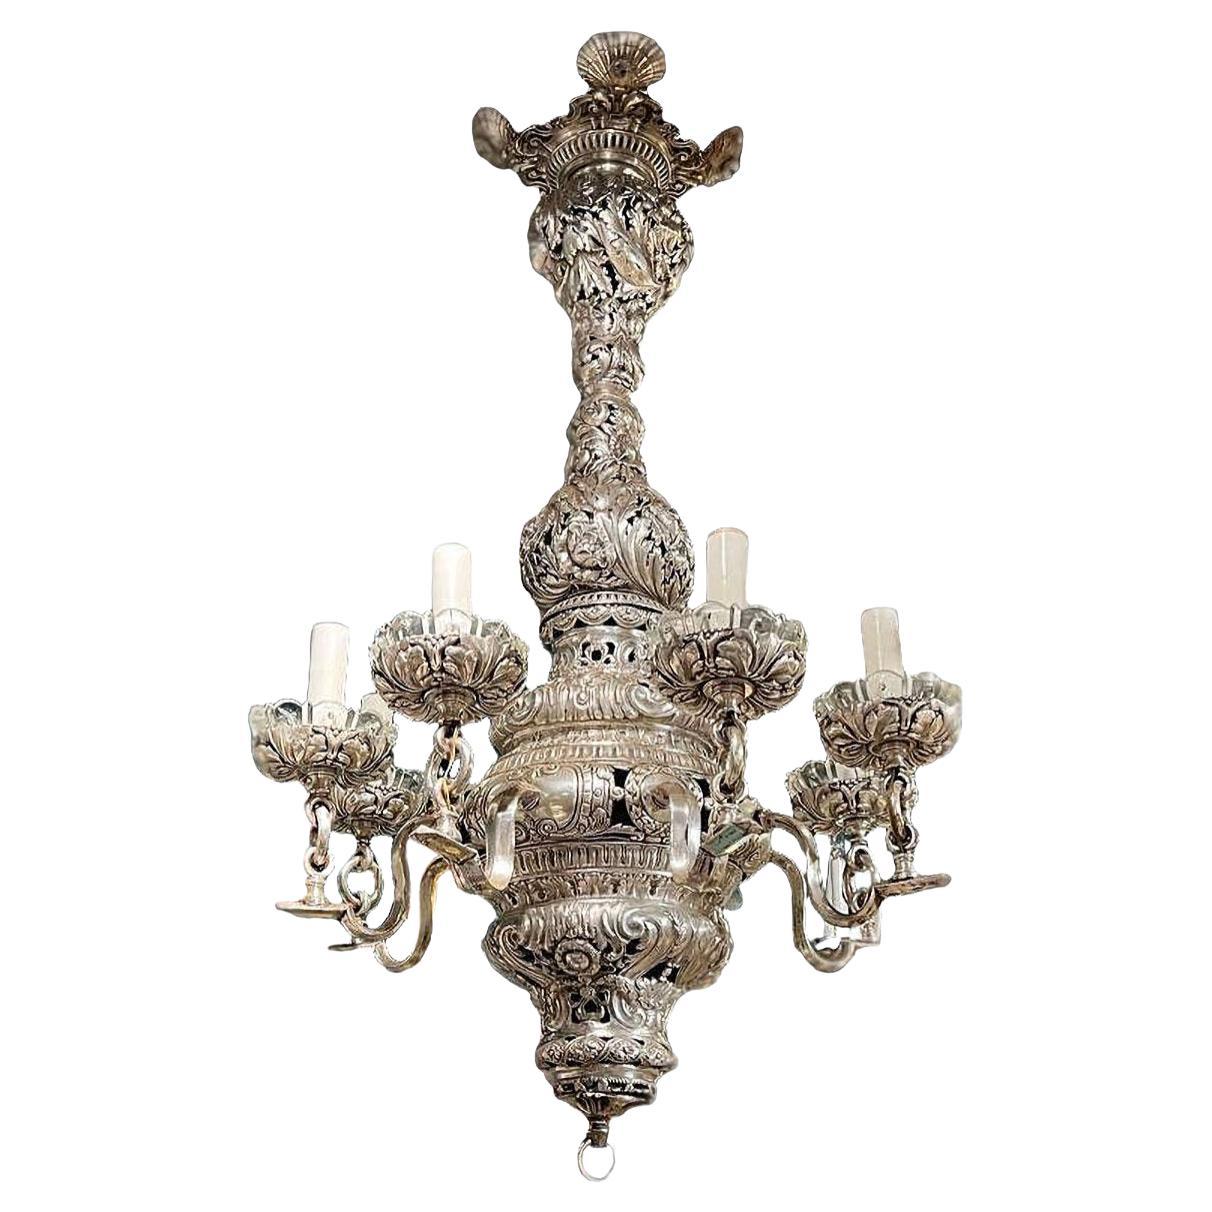 Baroque Style Silvered Metal Chandelier with Shell Motif Attributed to Caldwell